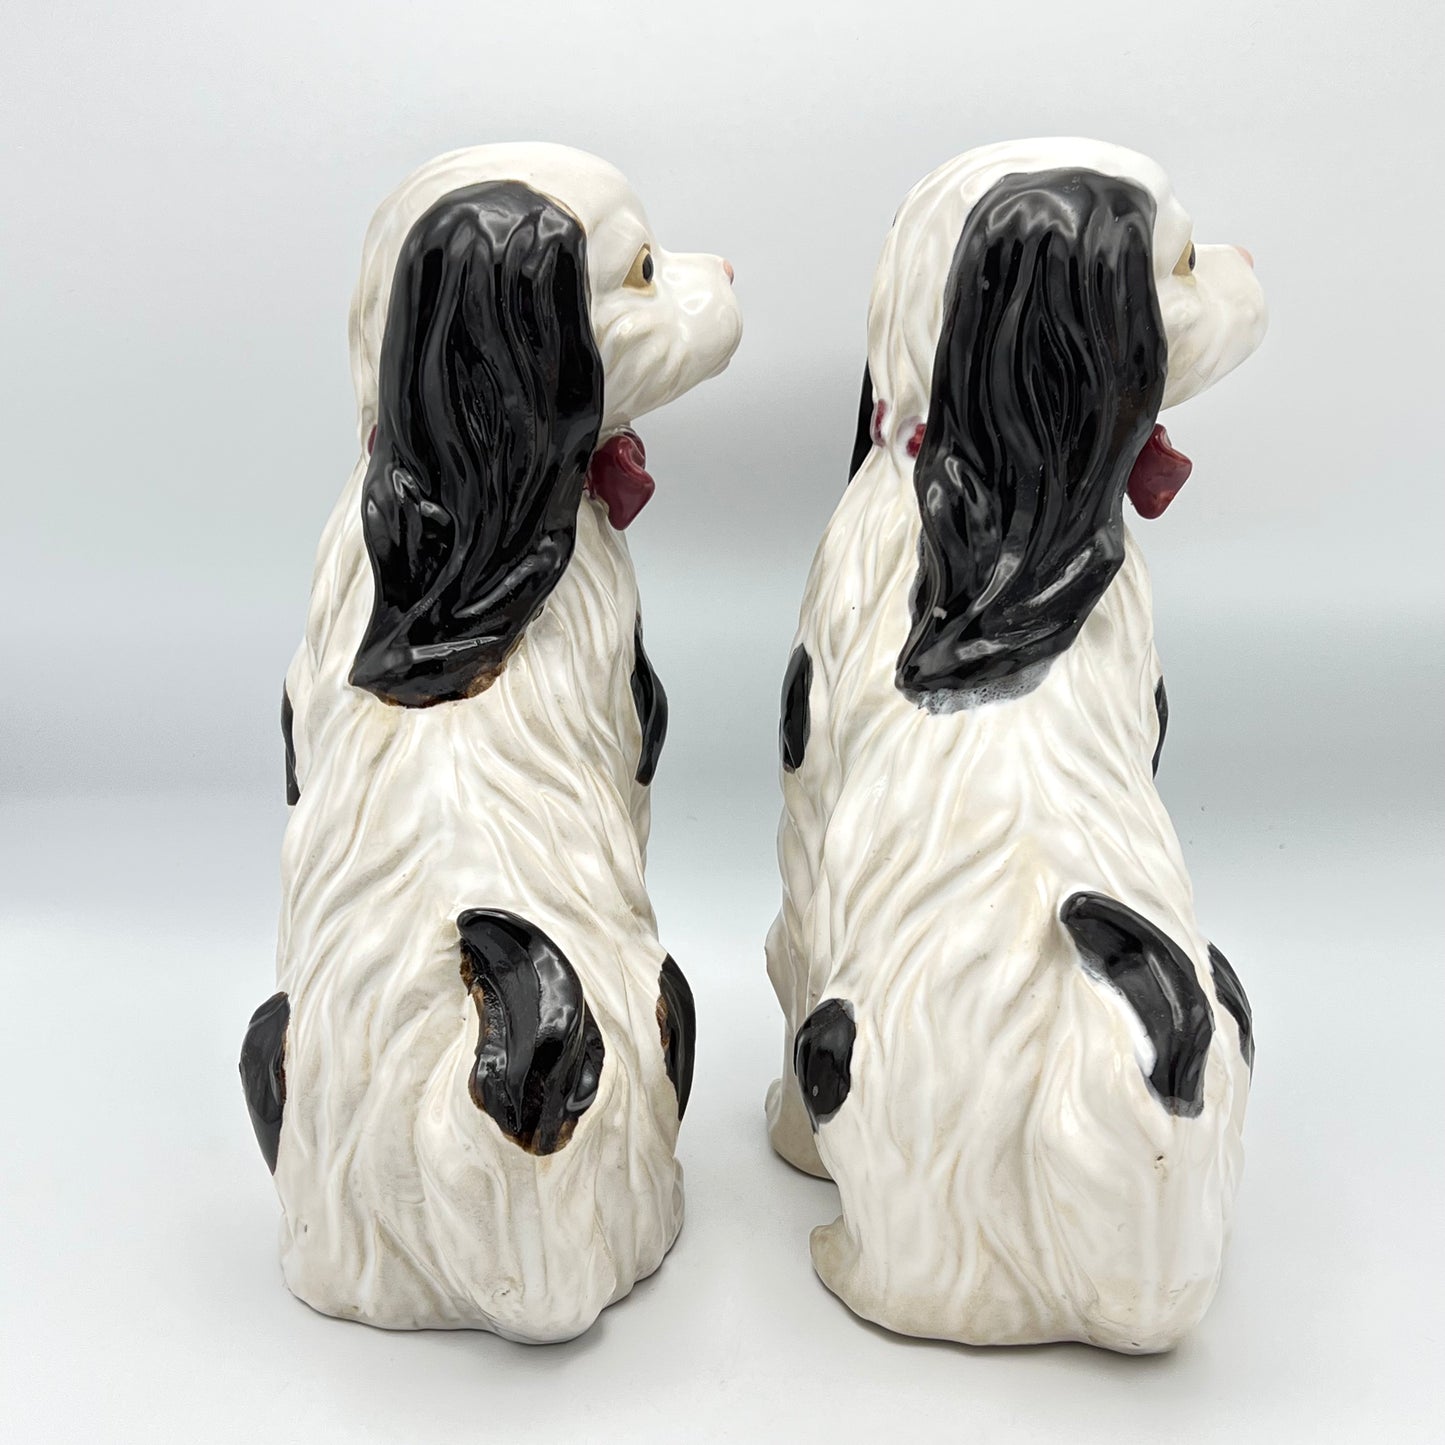 Large Staffordshire Dogs